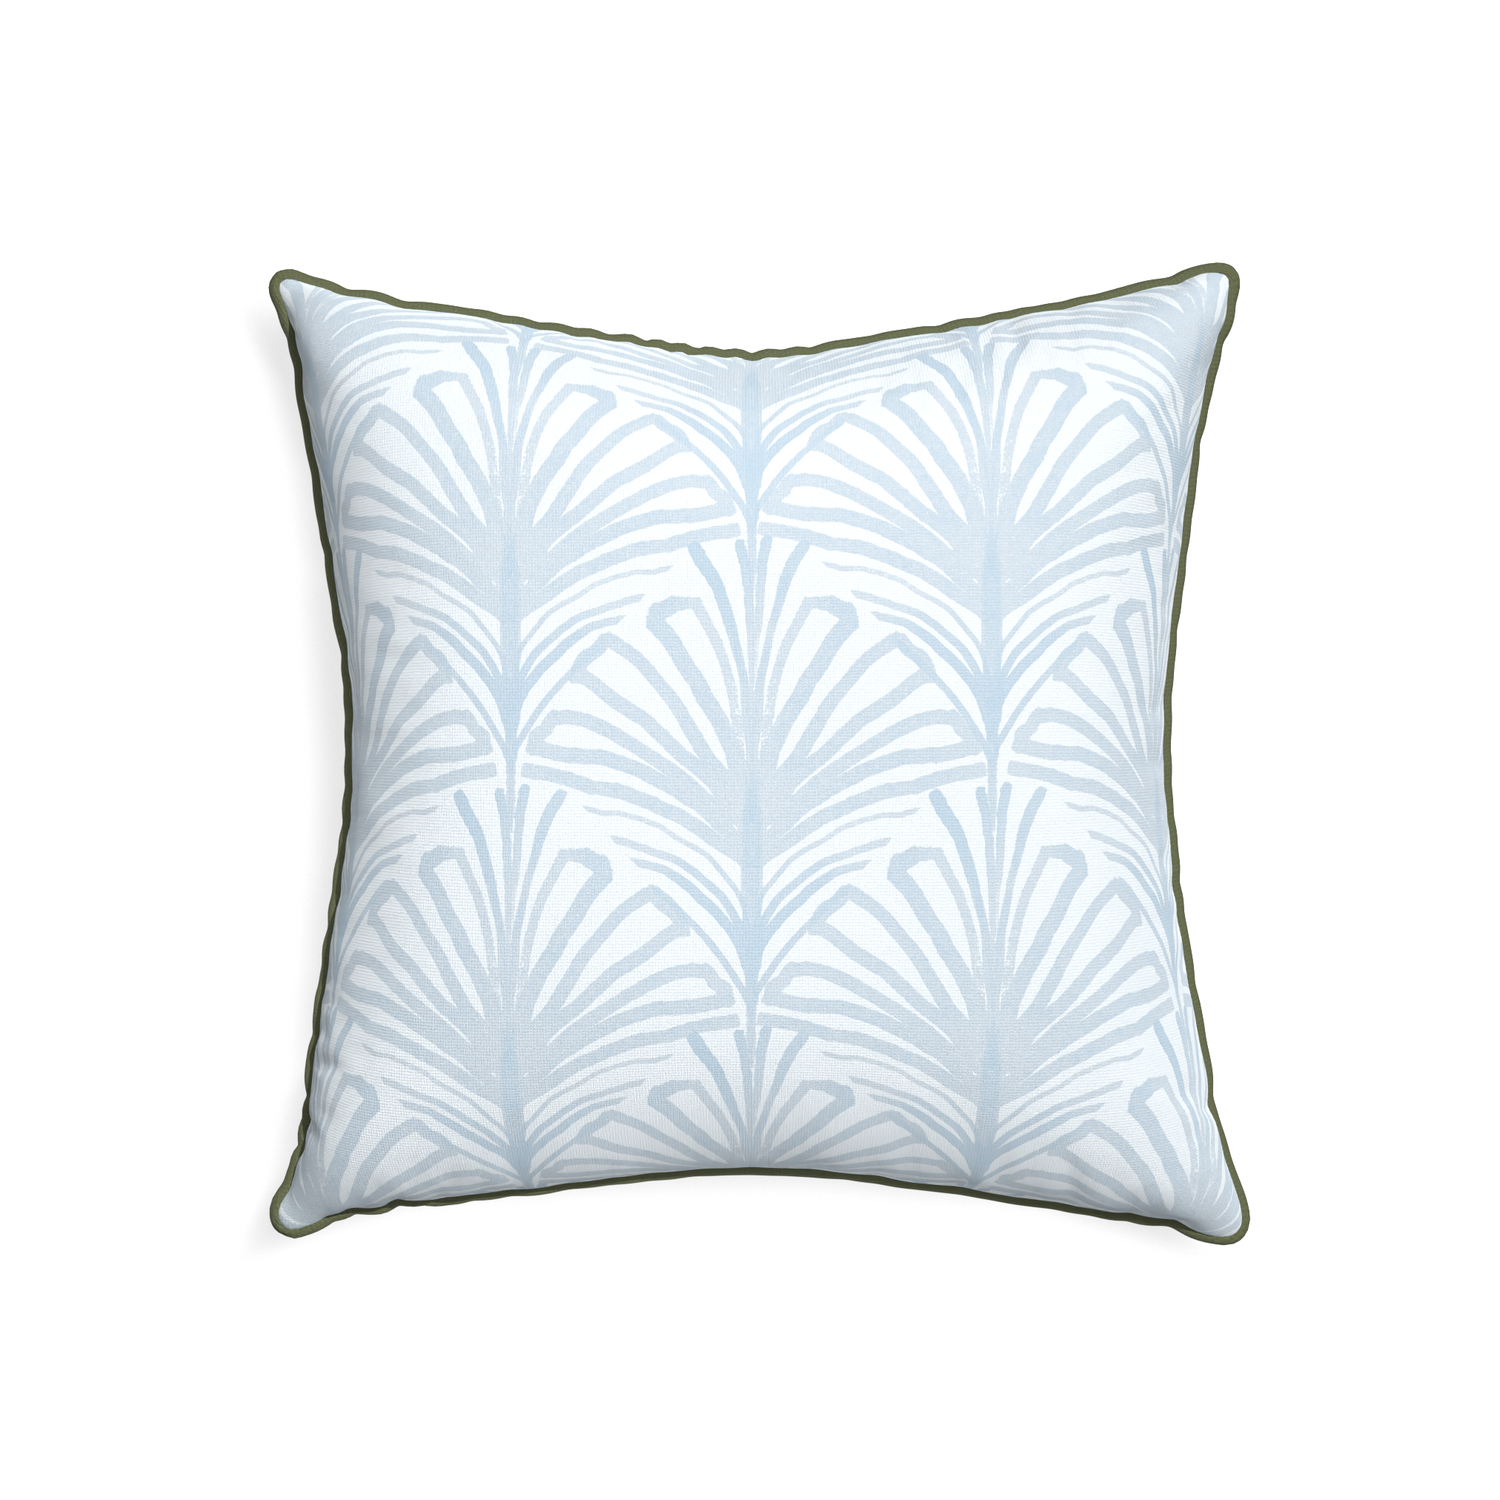 22-square suzy sky custom pillow with f piping on white background